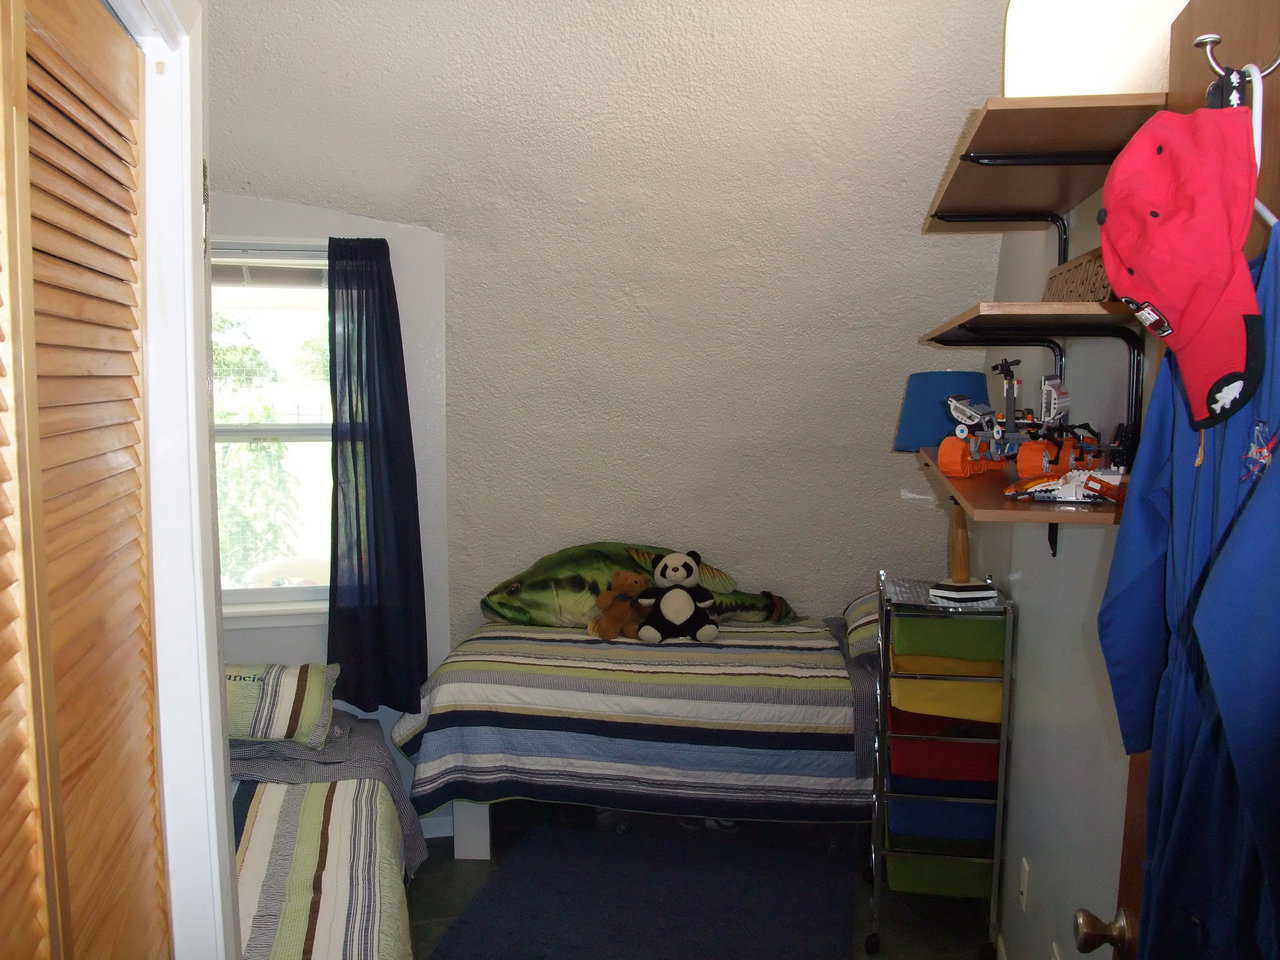 Boys’ bedroom — It includes beds and shelves for toys, tools and books.